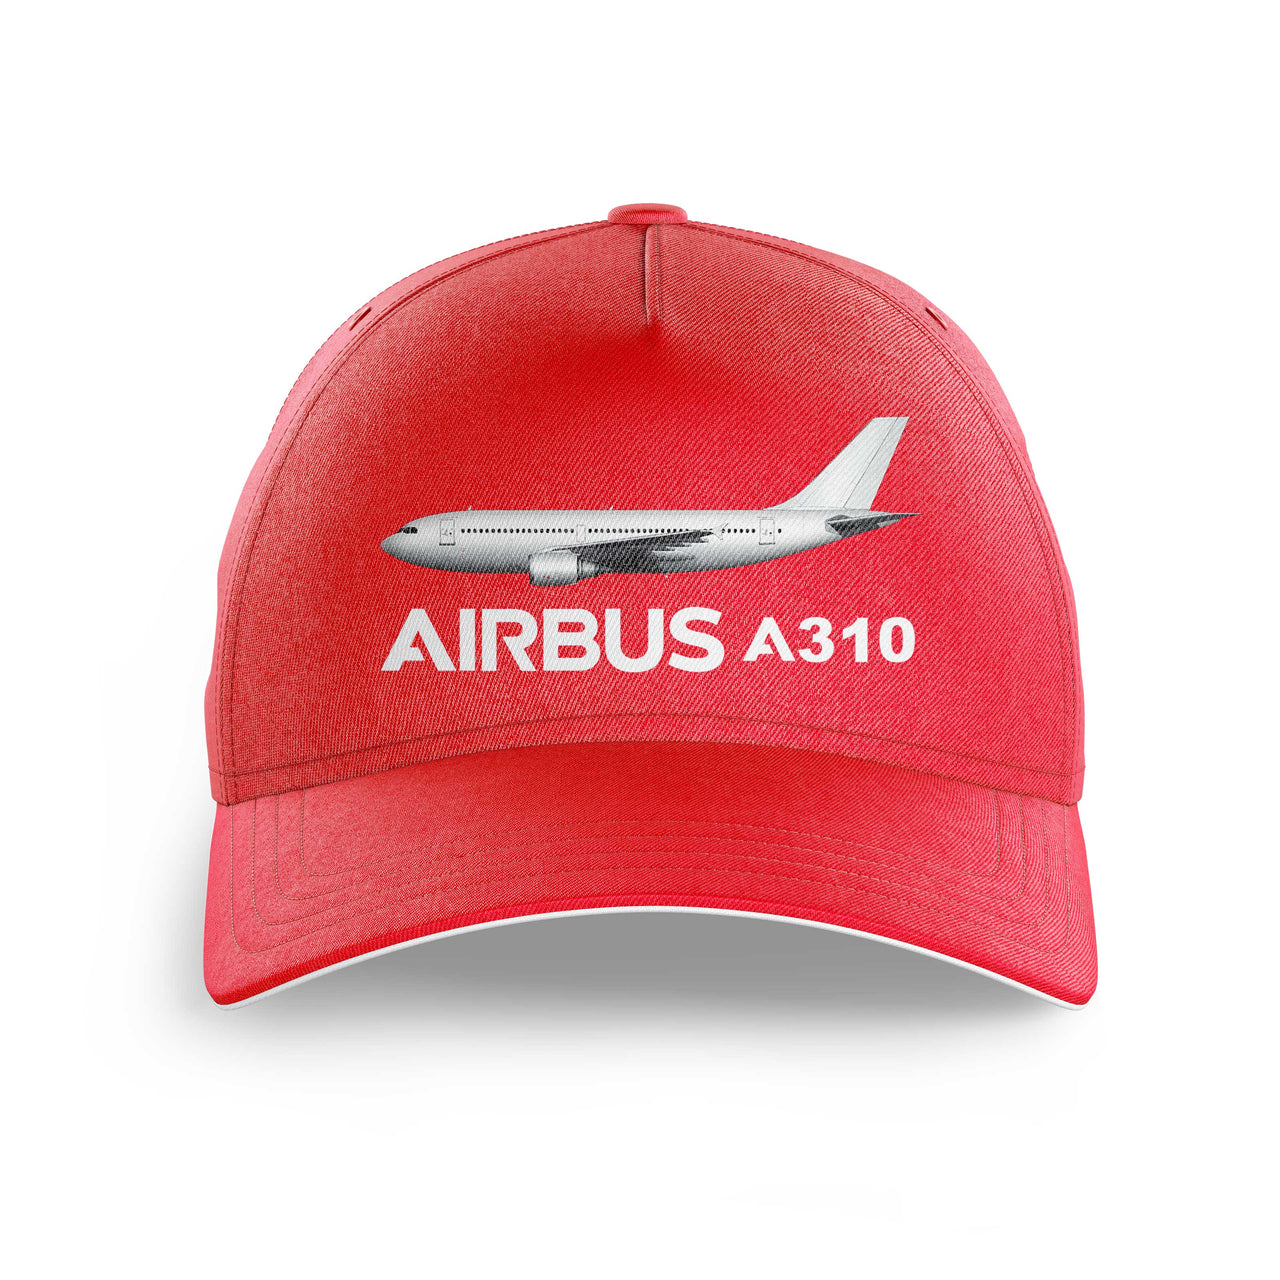 The Airbus A310 Printed Hats